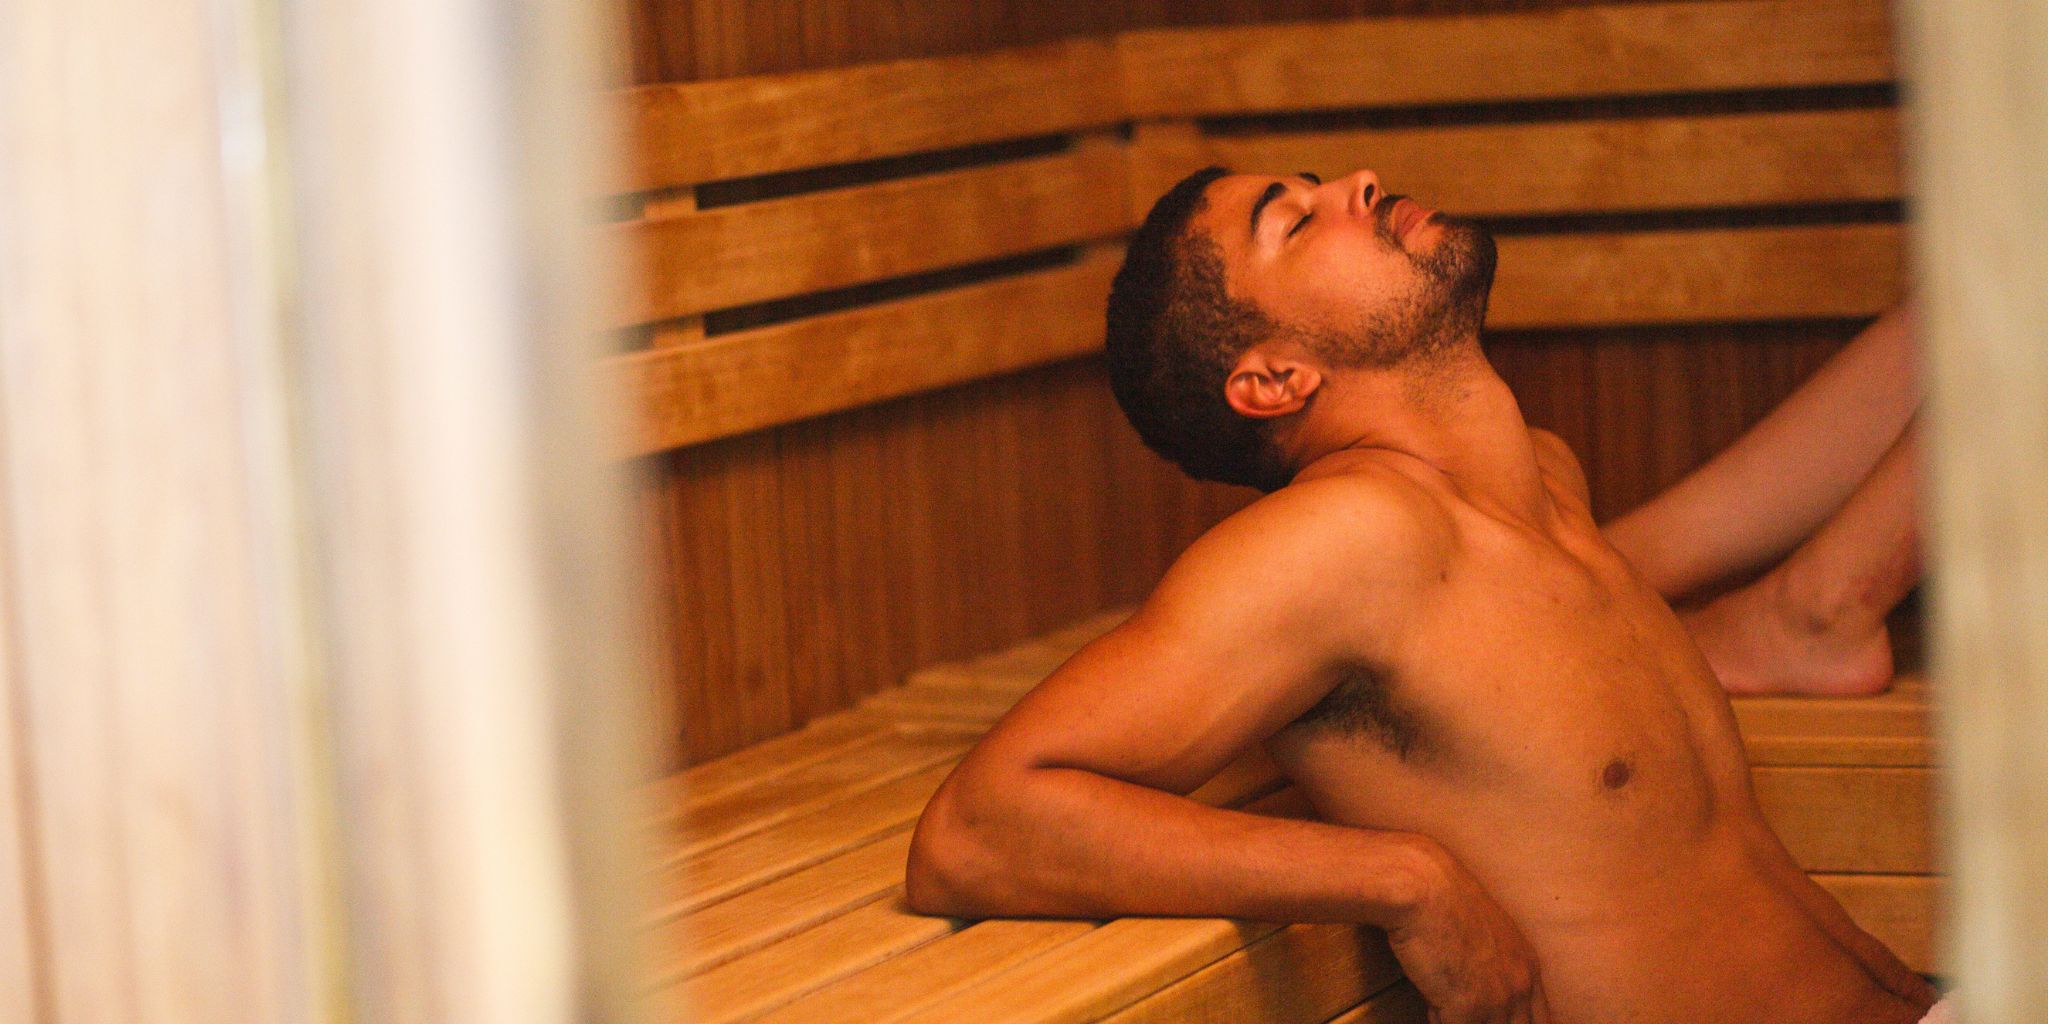 Benefits of sauna home therapy